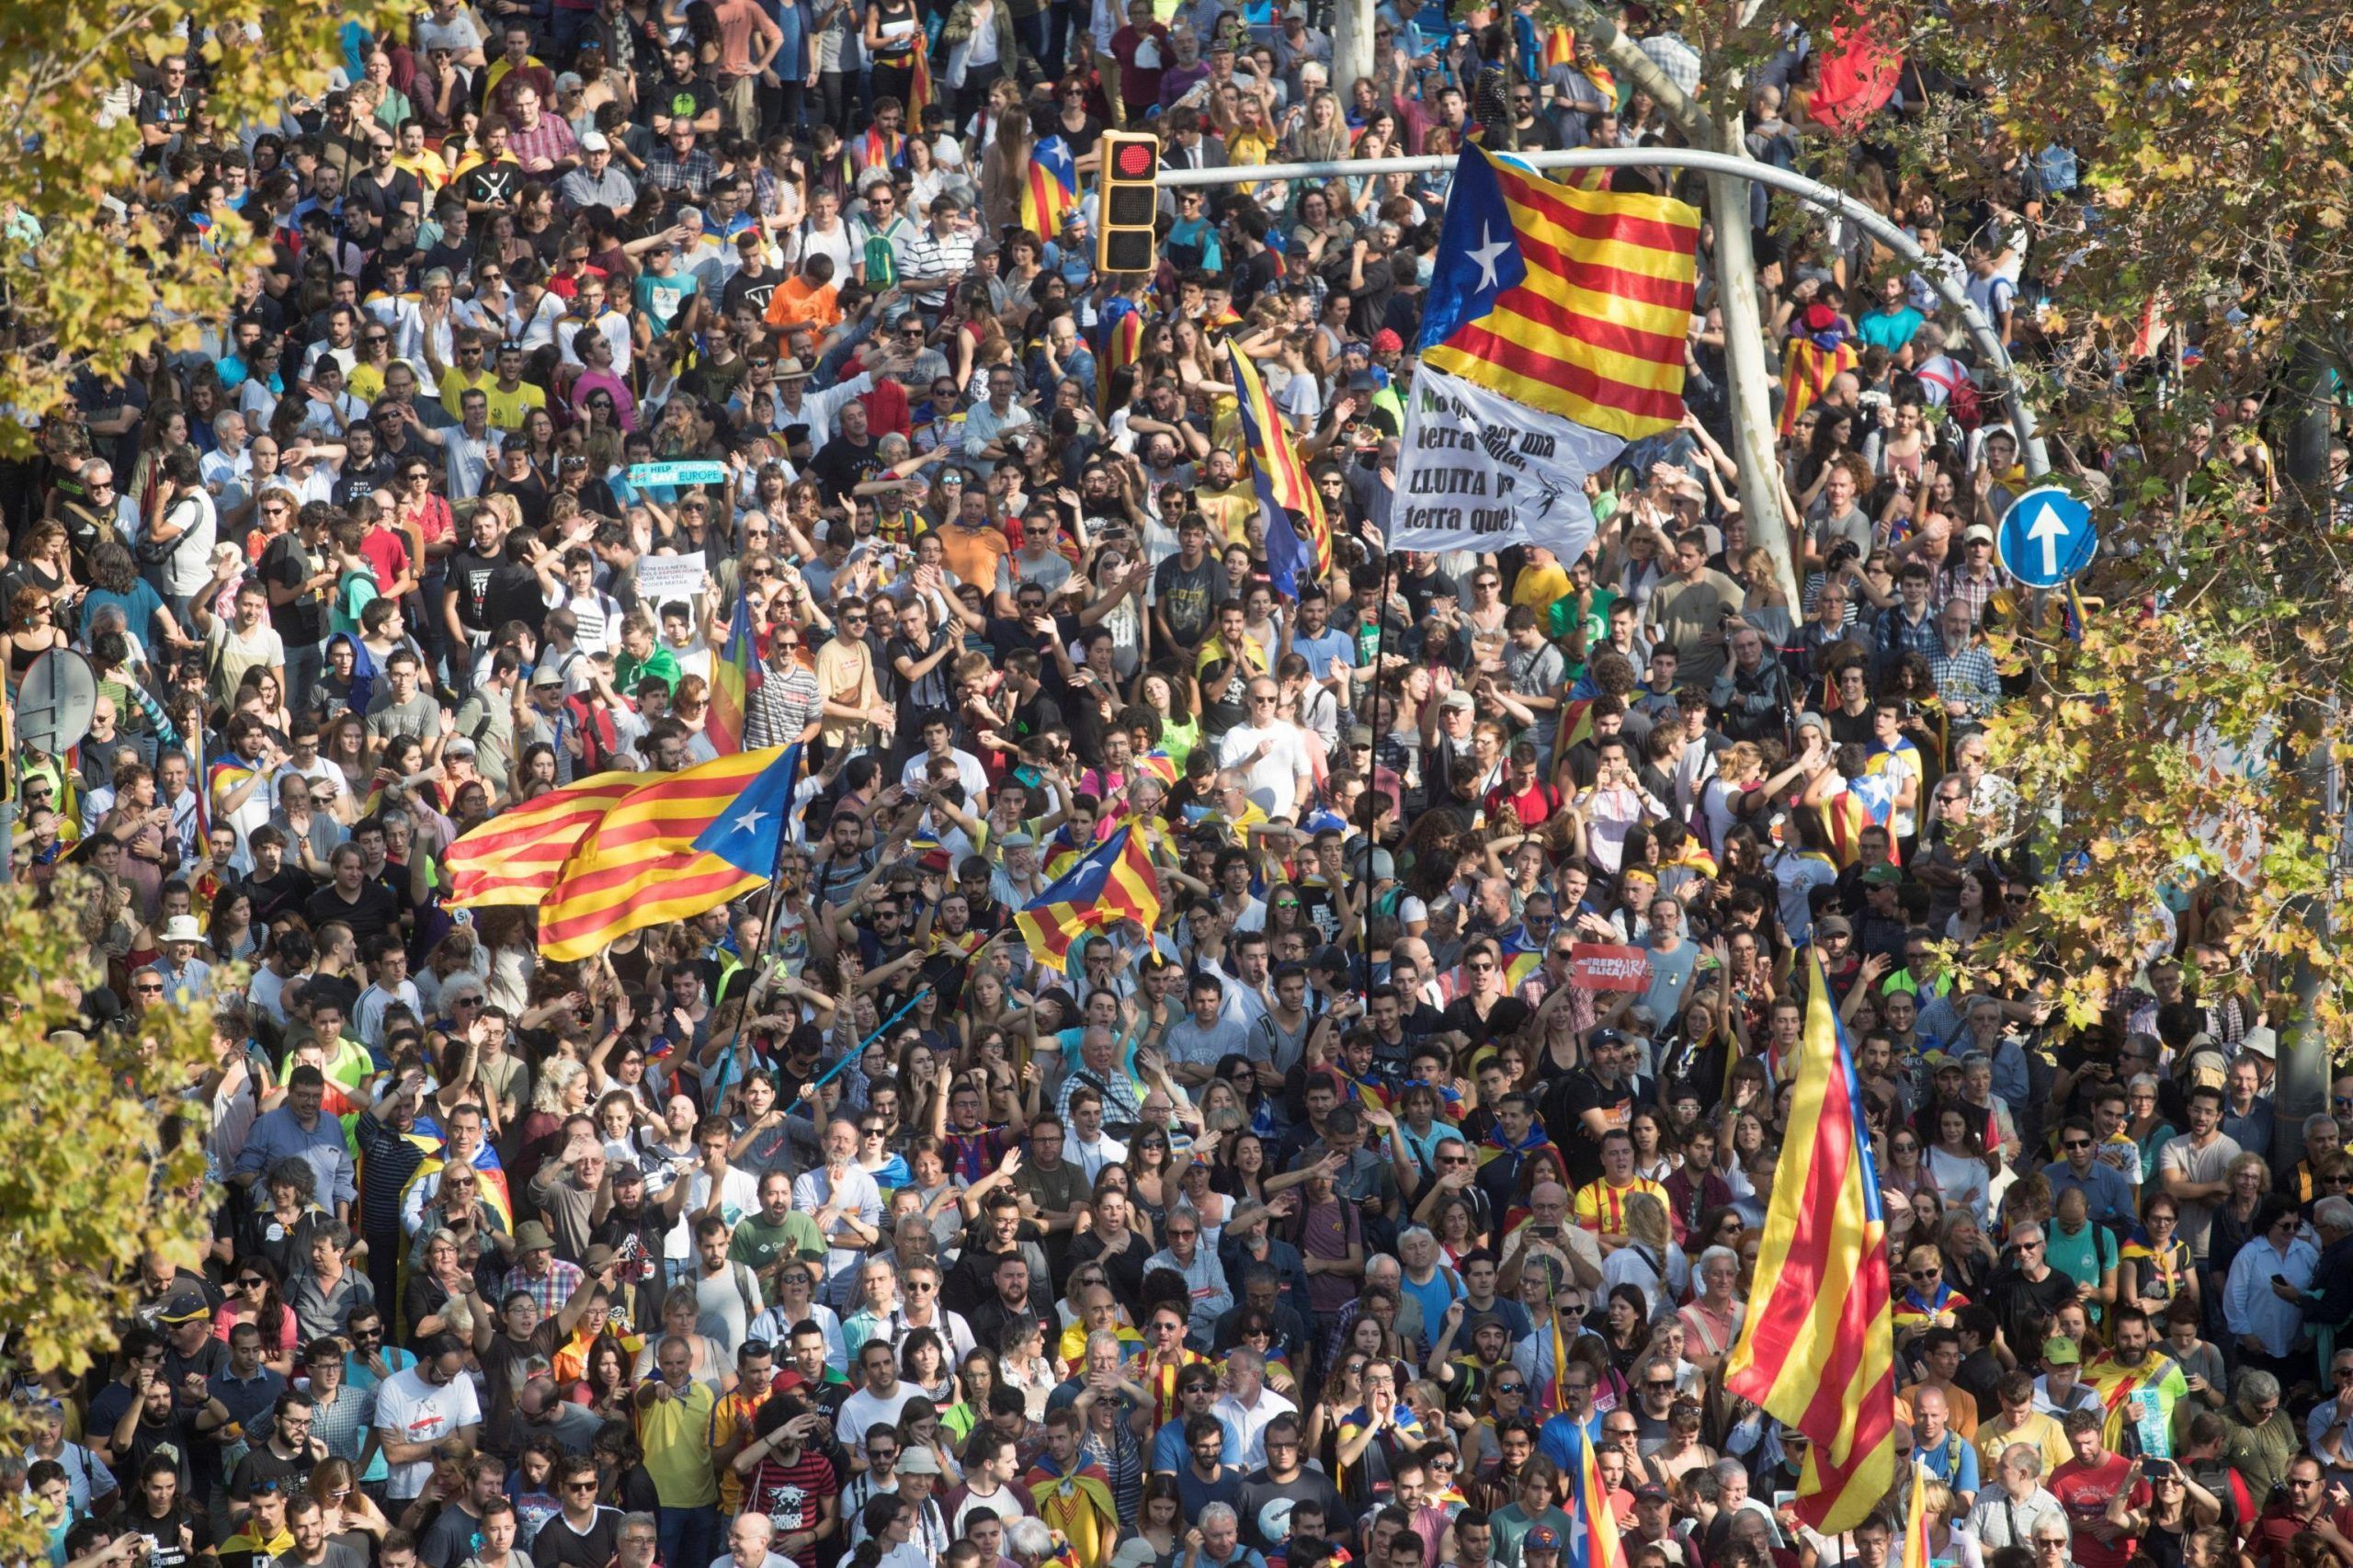 Protest in support of the independence declaration in Catalonia